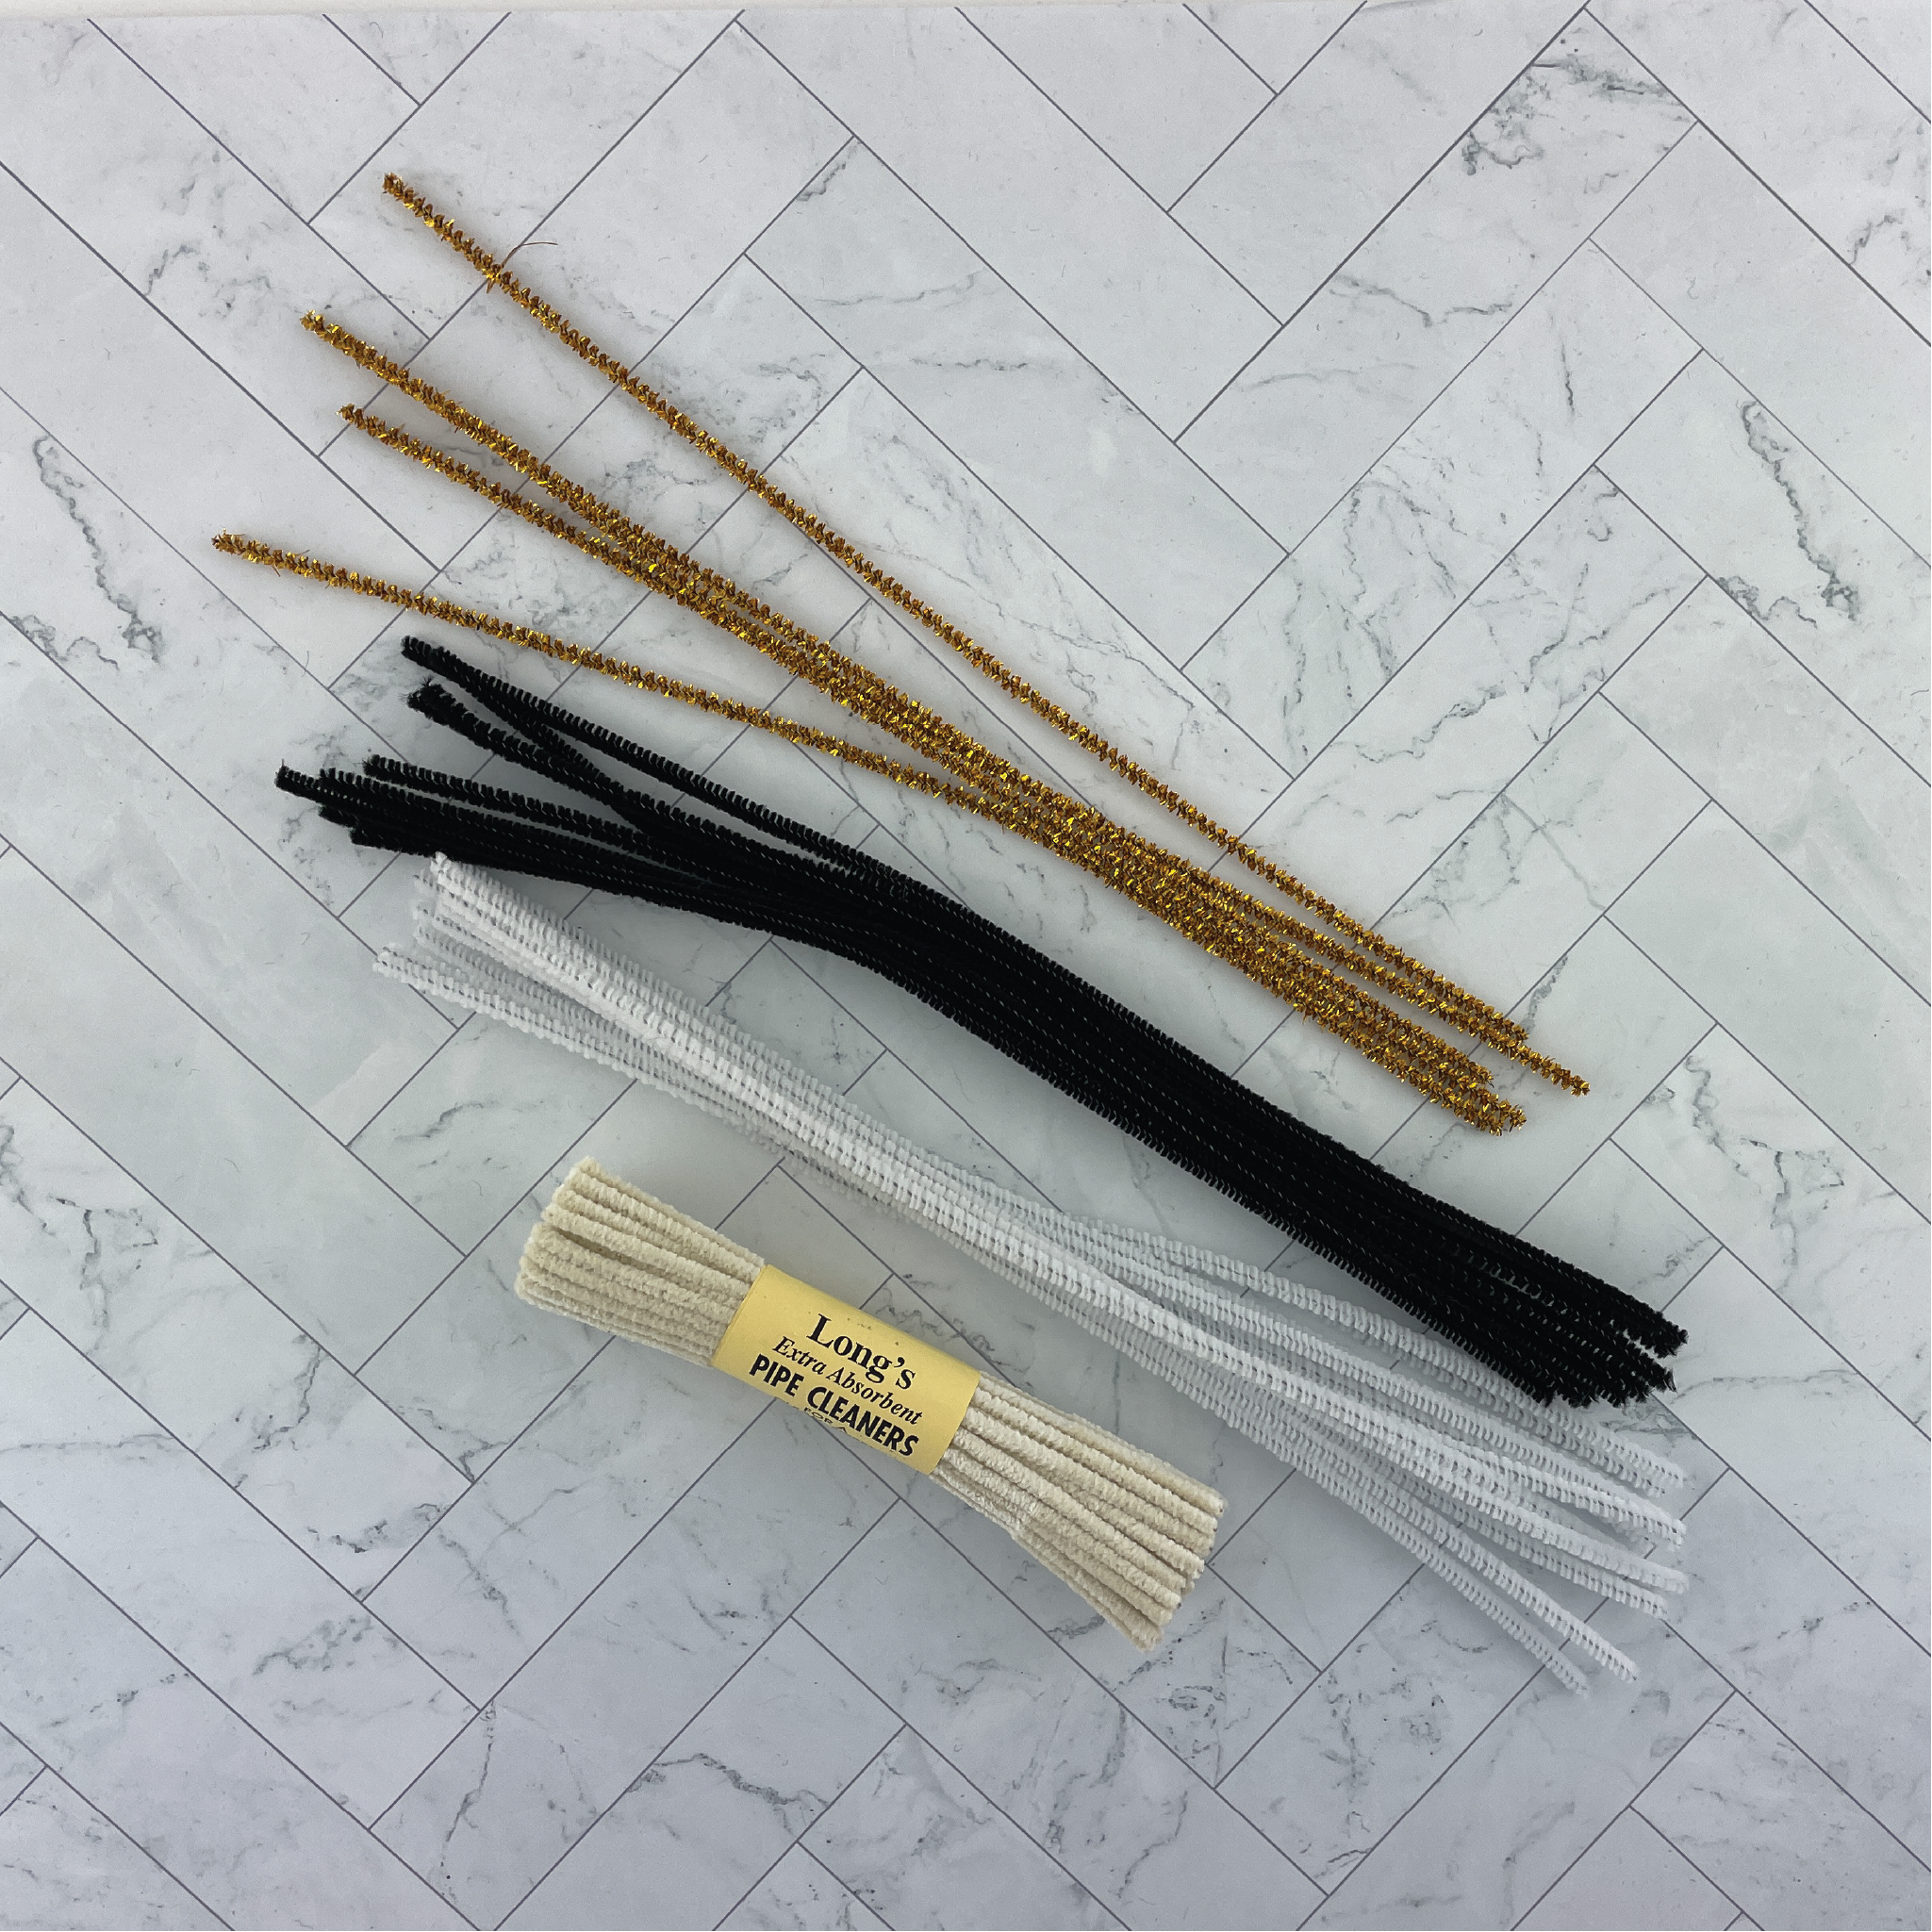 3mm Chenille Stems and B.J. Long Pipe Cleaners – Prim Heirloom Designs